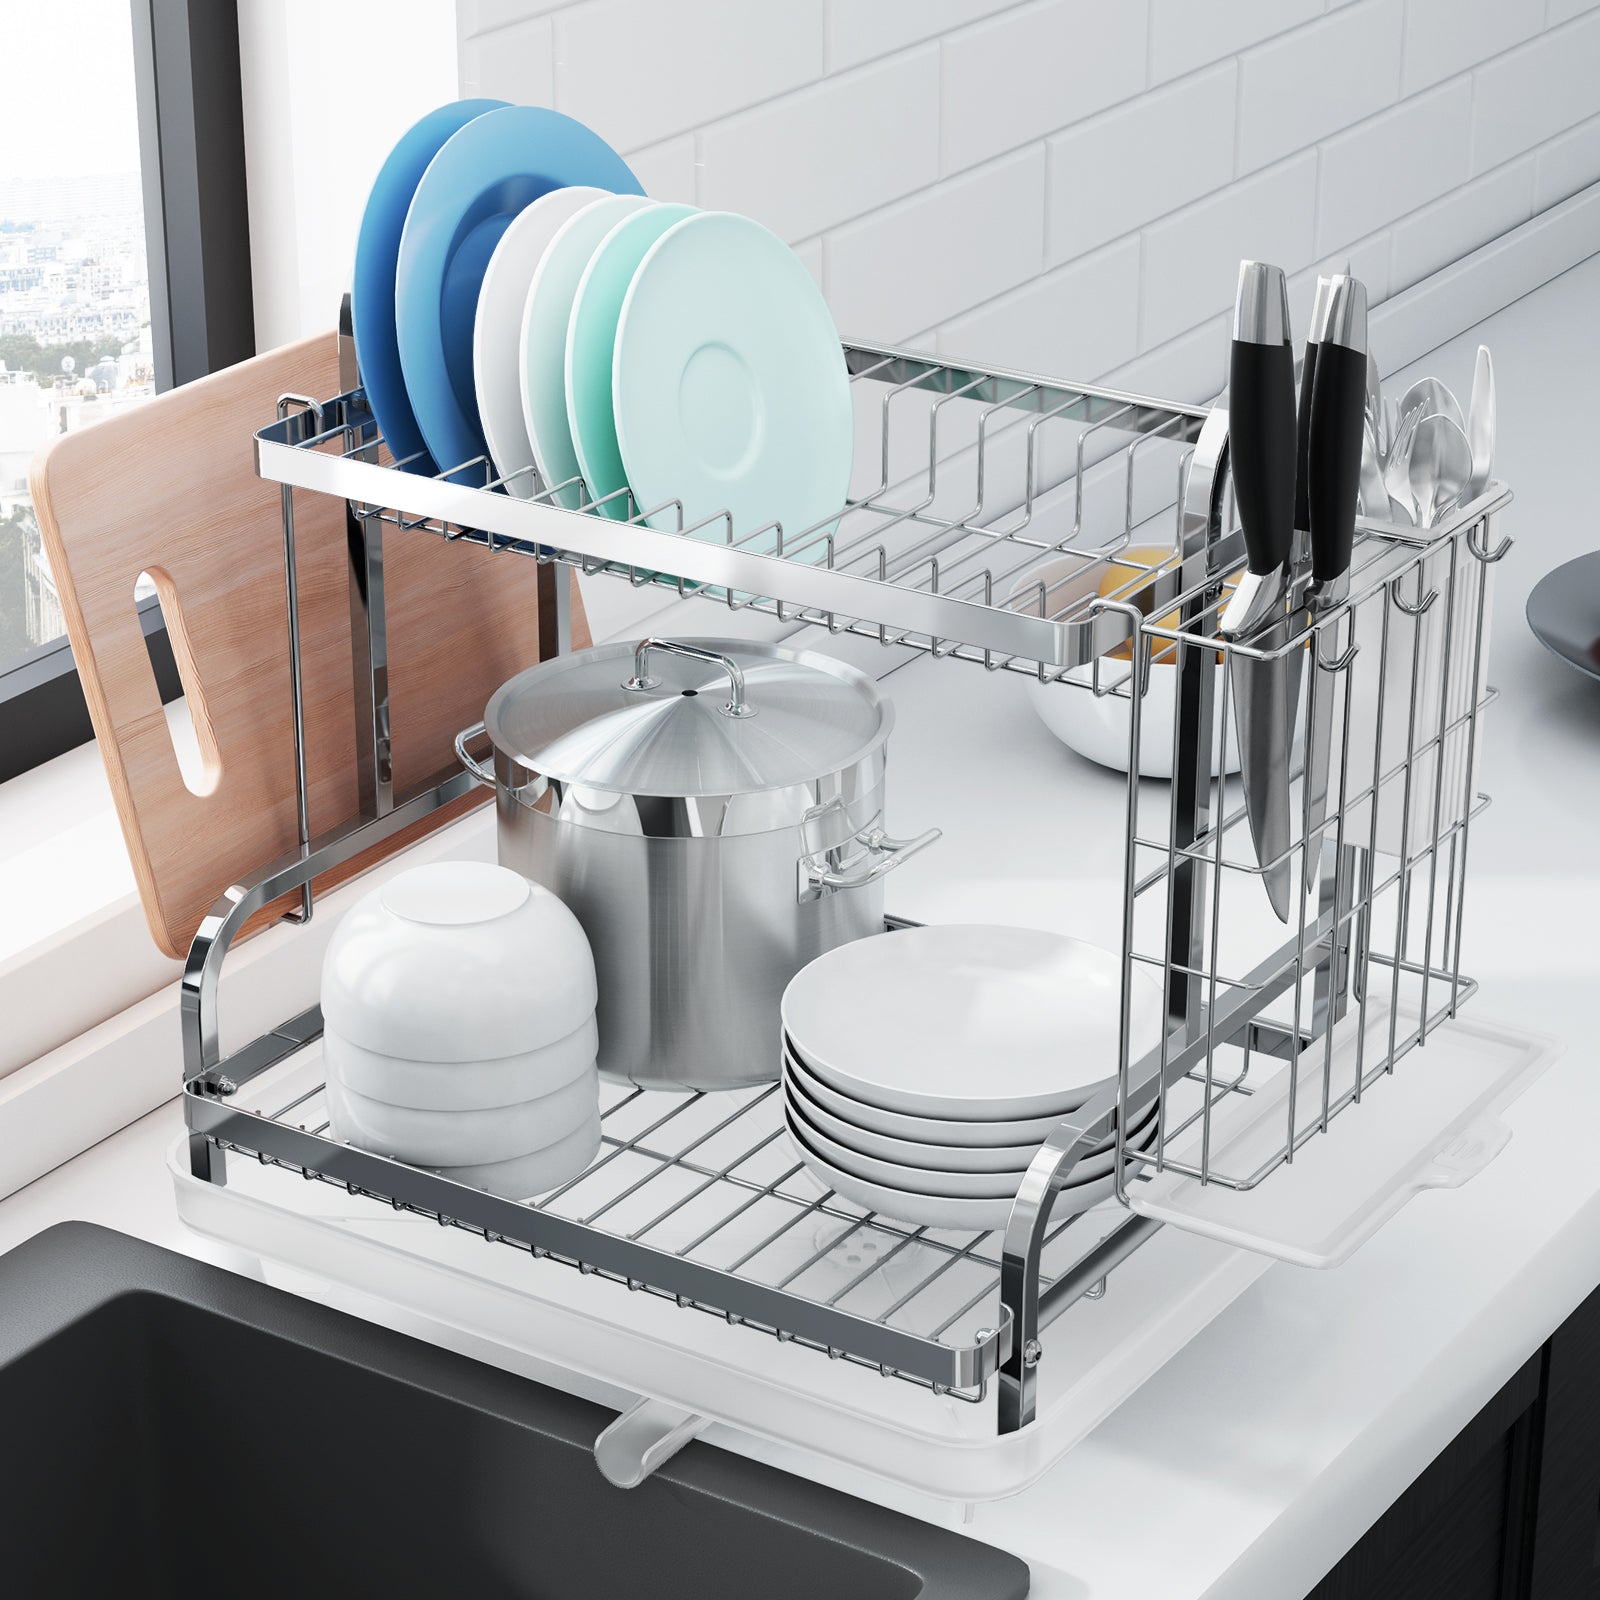 Kitsure Dish Drying Rack: The Must-Have Space-Saving Solution for